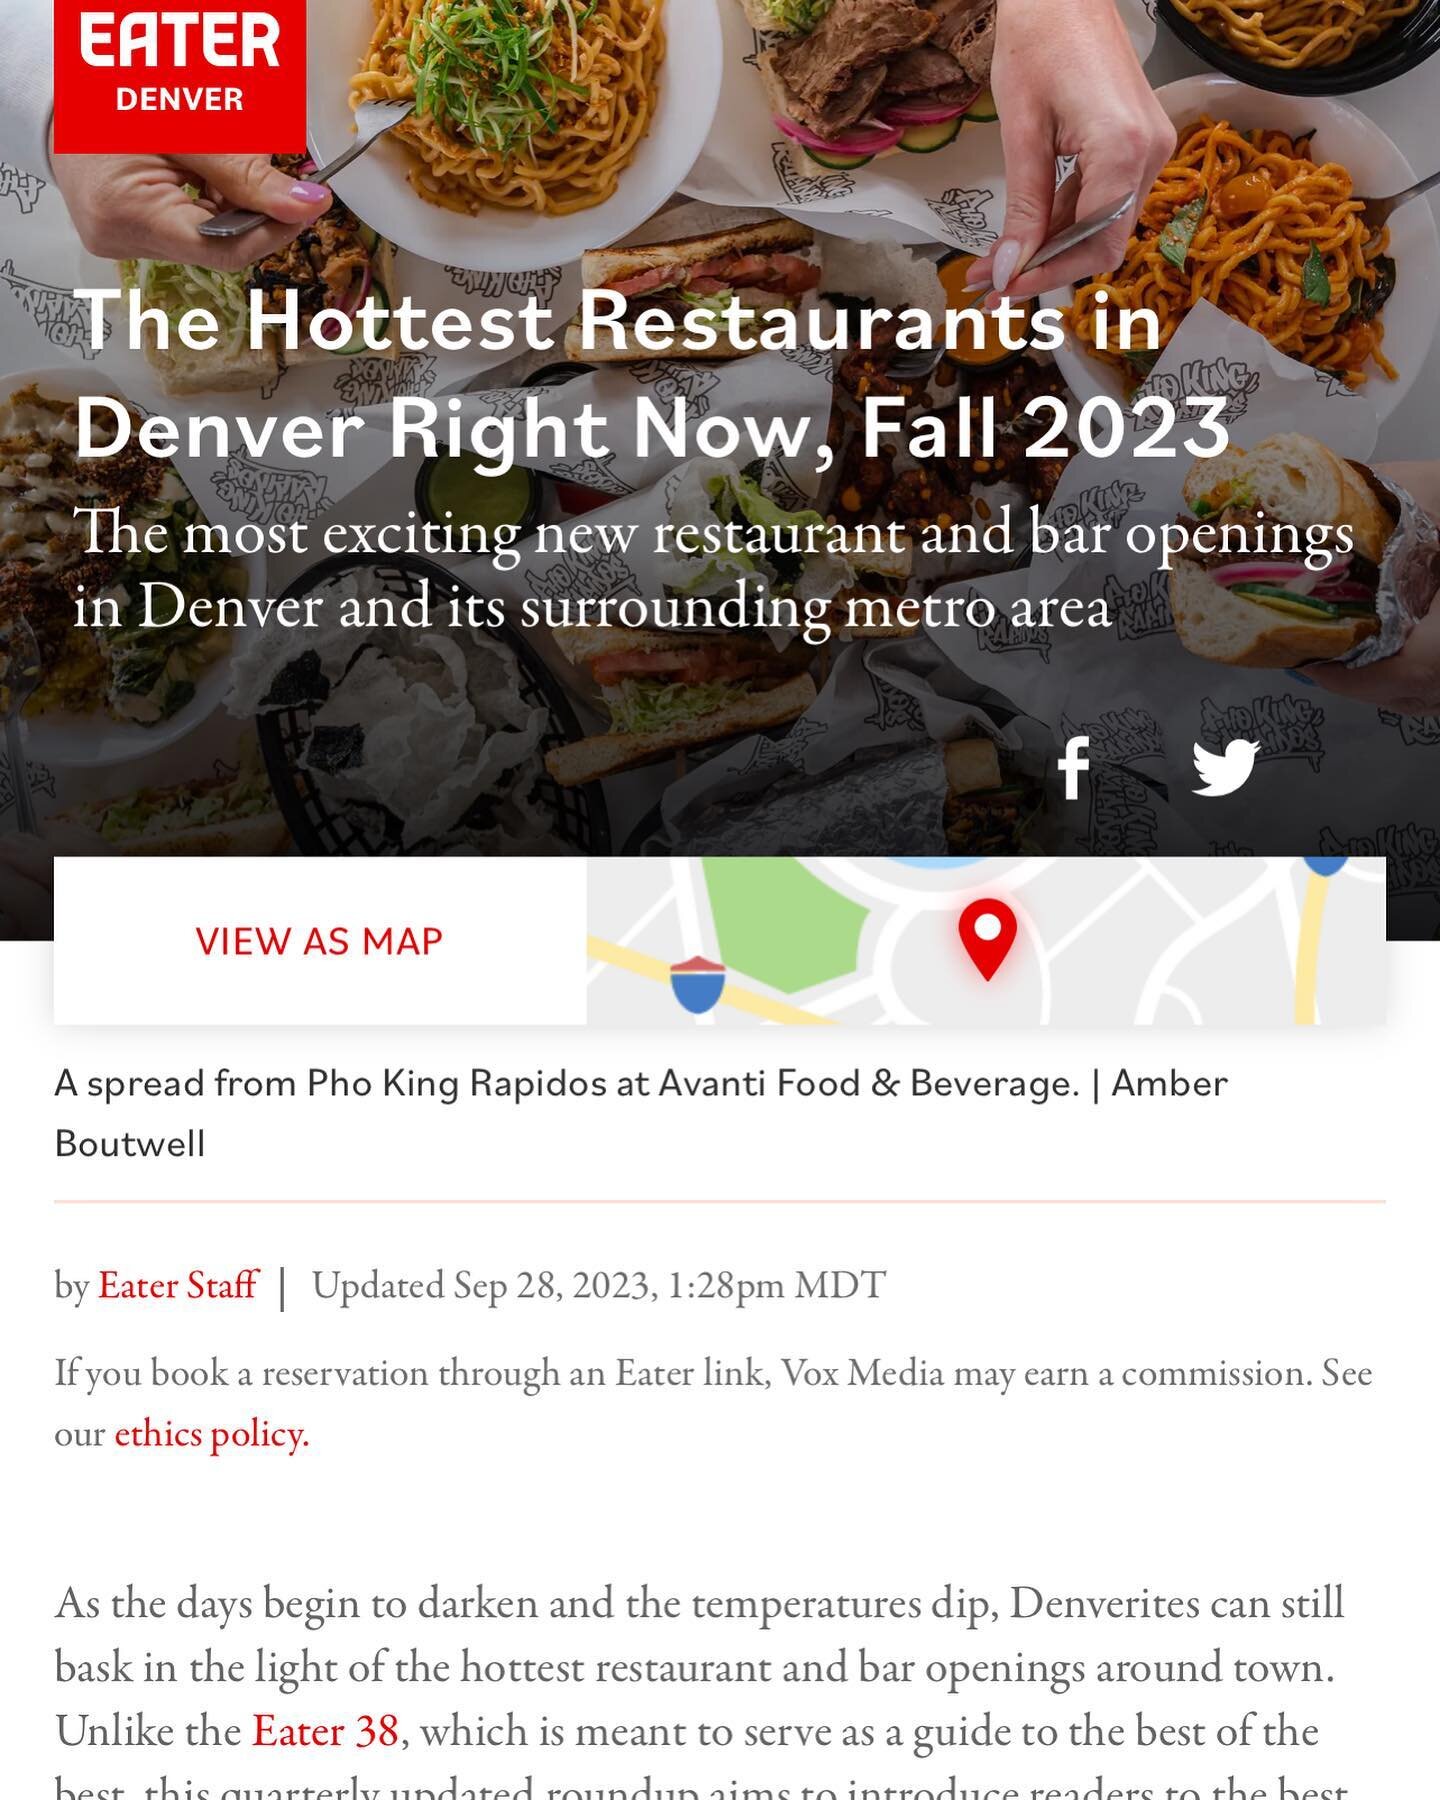 What an honor it is to be named one of Denver&rsquo;s hottest restaurants of fall 2023!!! To be named on this list with these amazing restaurants is absolutely mind blowing!! Thank you so much @eater_denver for this great honor!! Congratulations to e